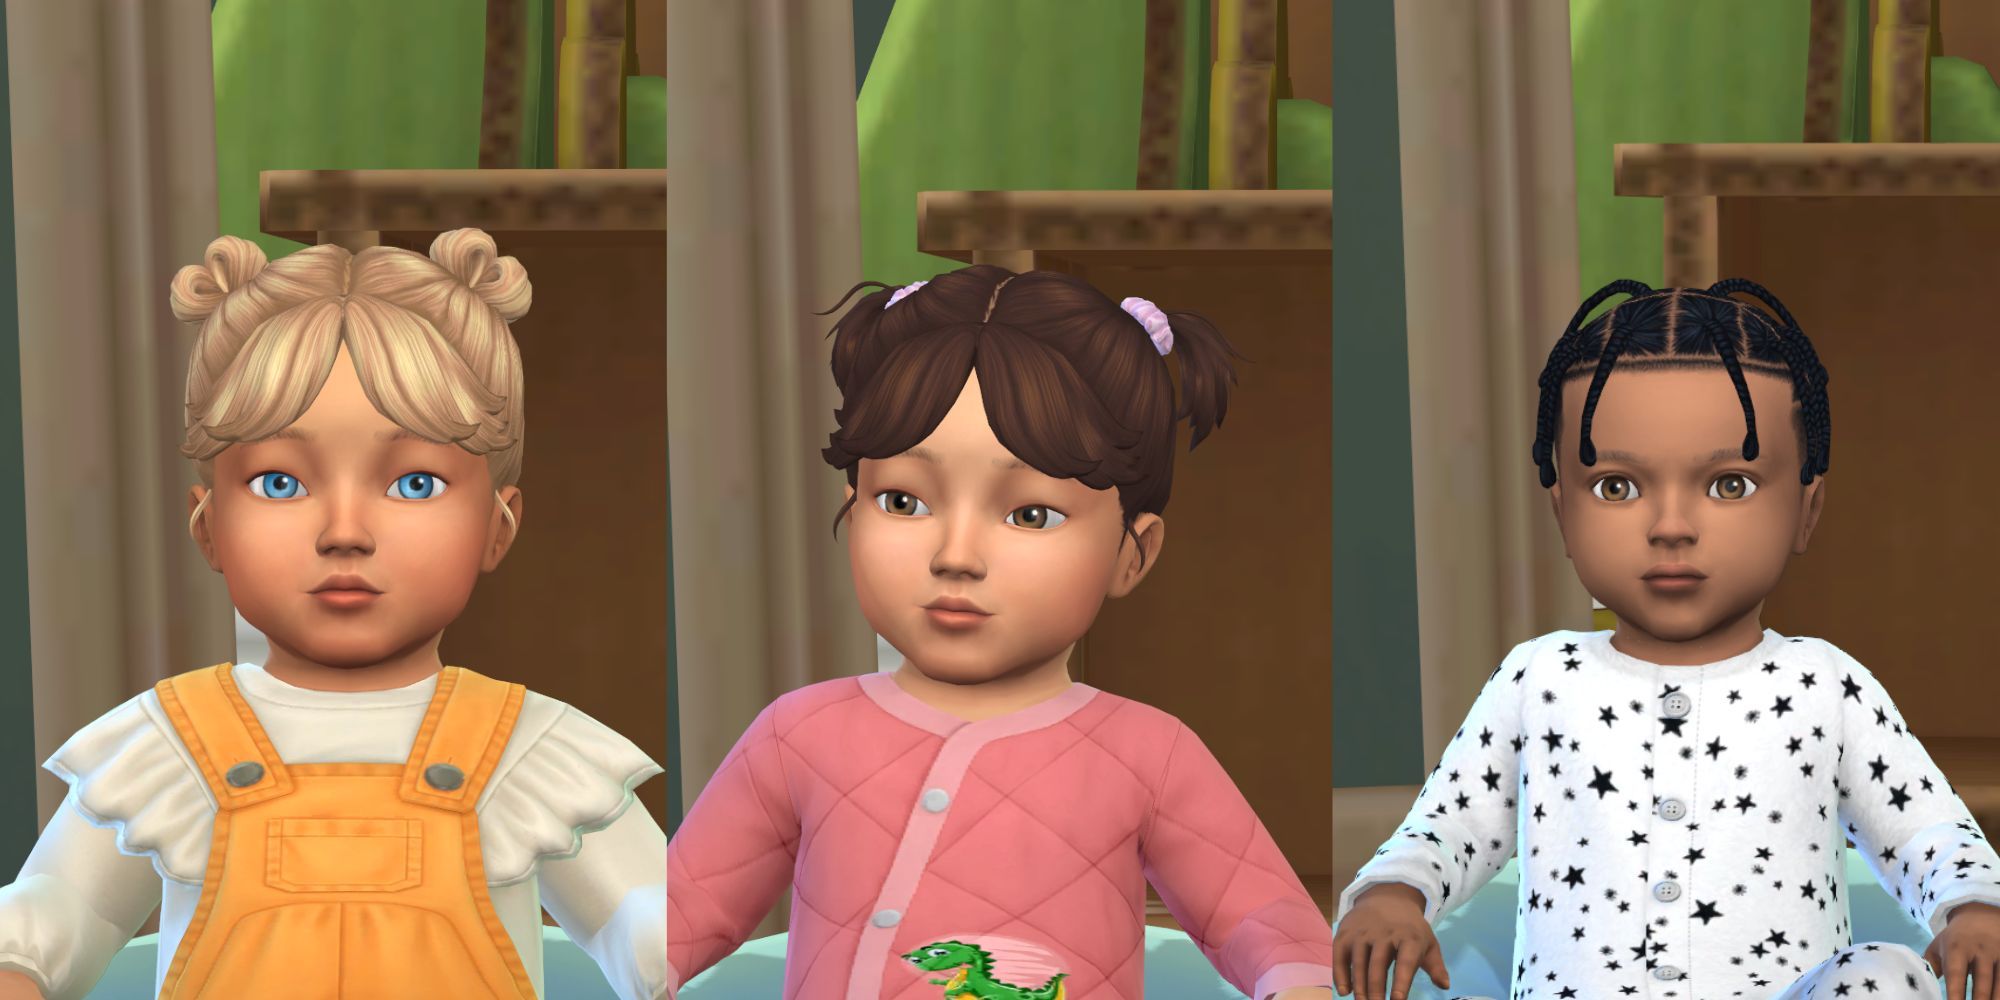 The Sims 4 RavenSims' Infant Hairstyles Bridget, Olive and Jayce